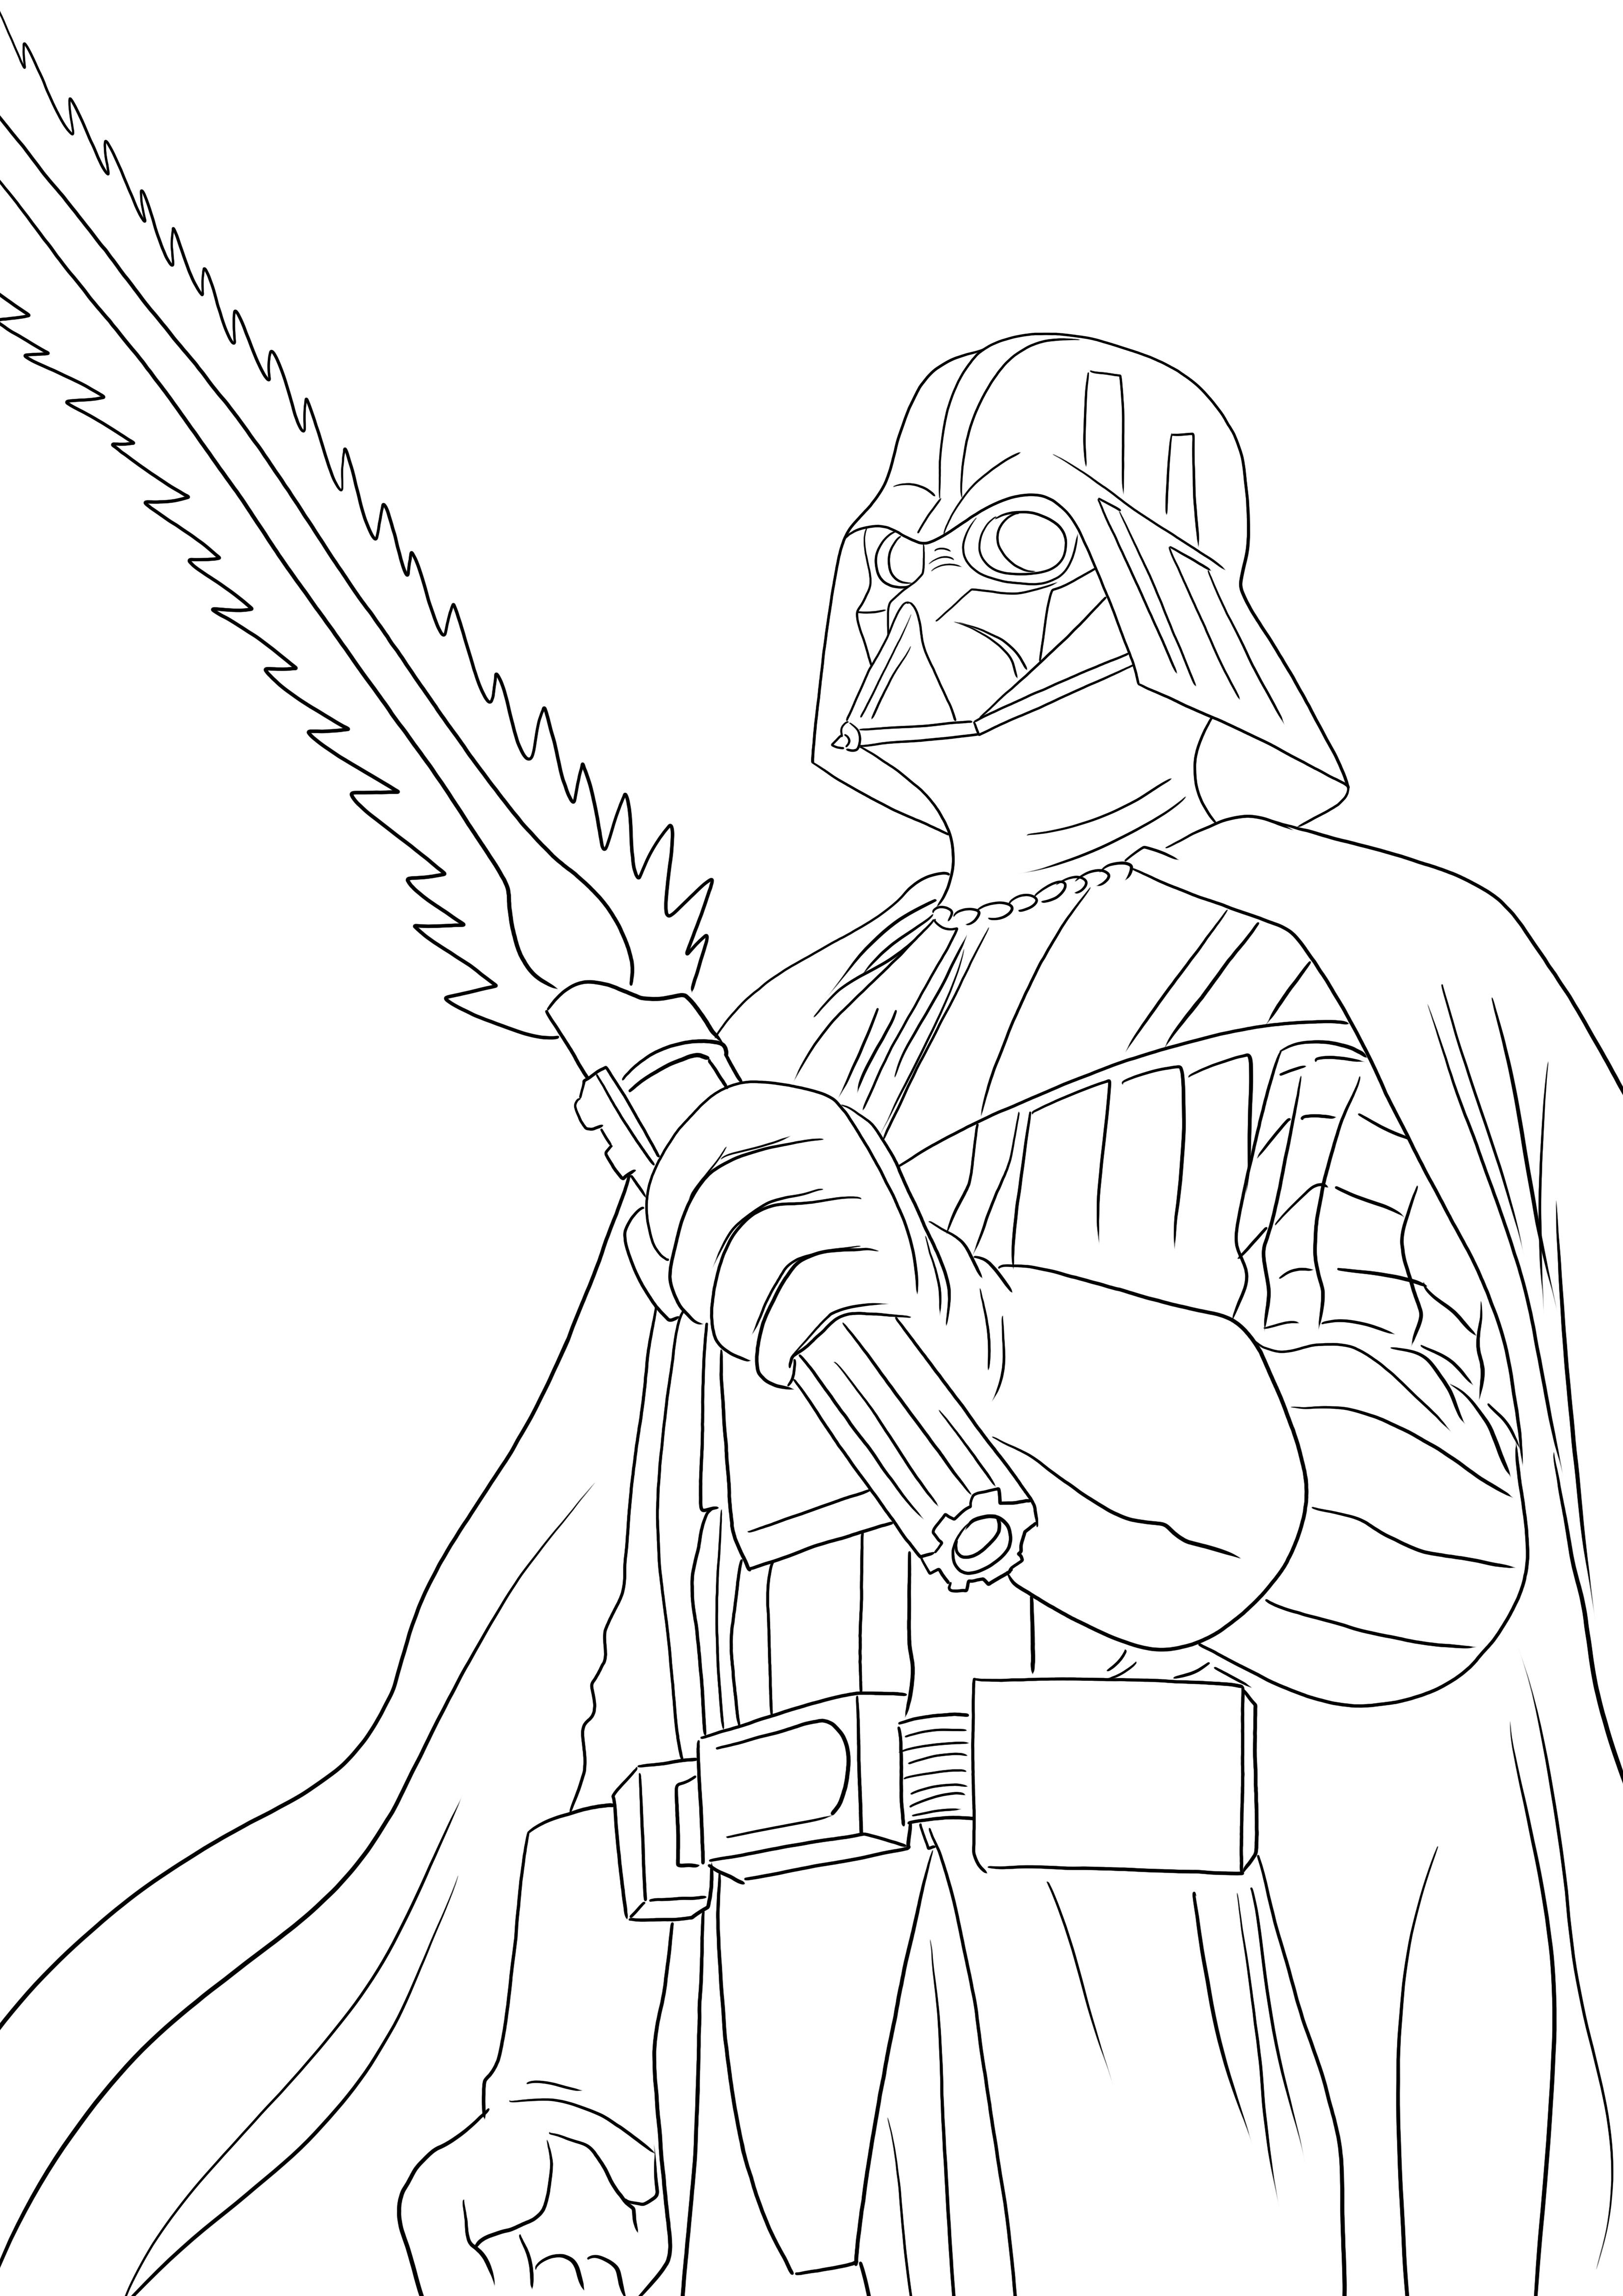 Darth Vader villain free printable to color for all Star Wars lovers